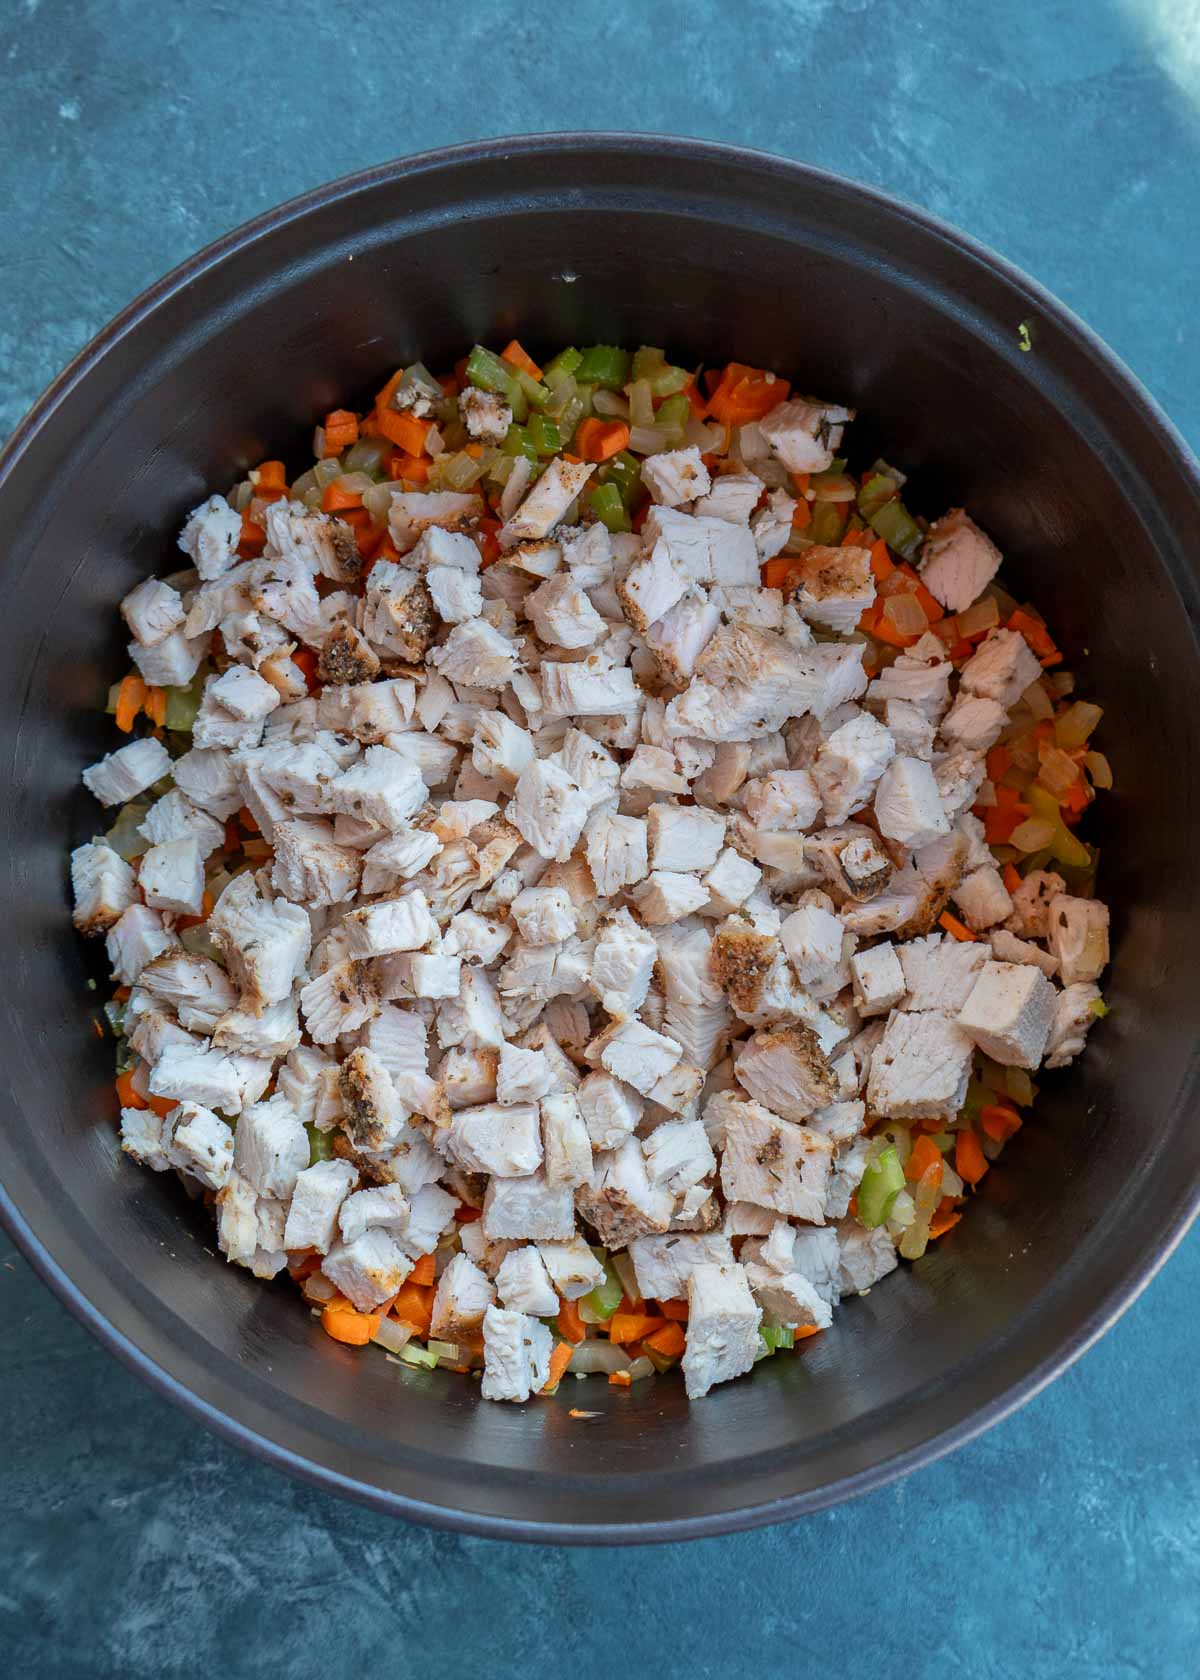 turkey added to sauteed veggies in a pot